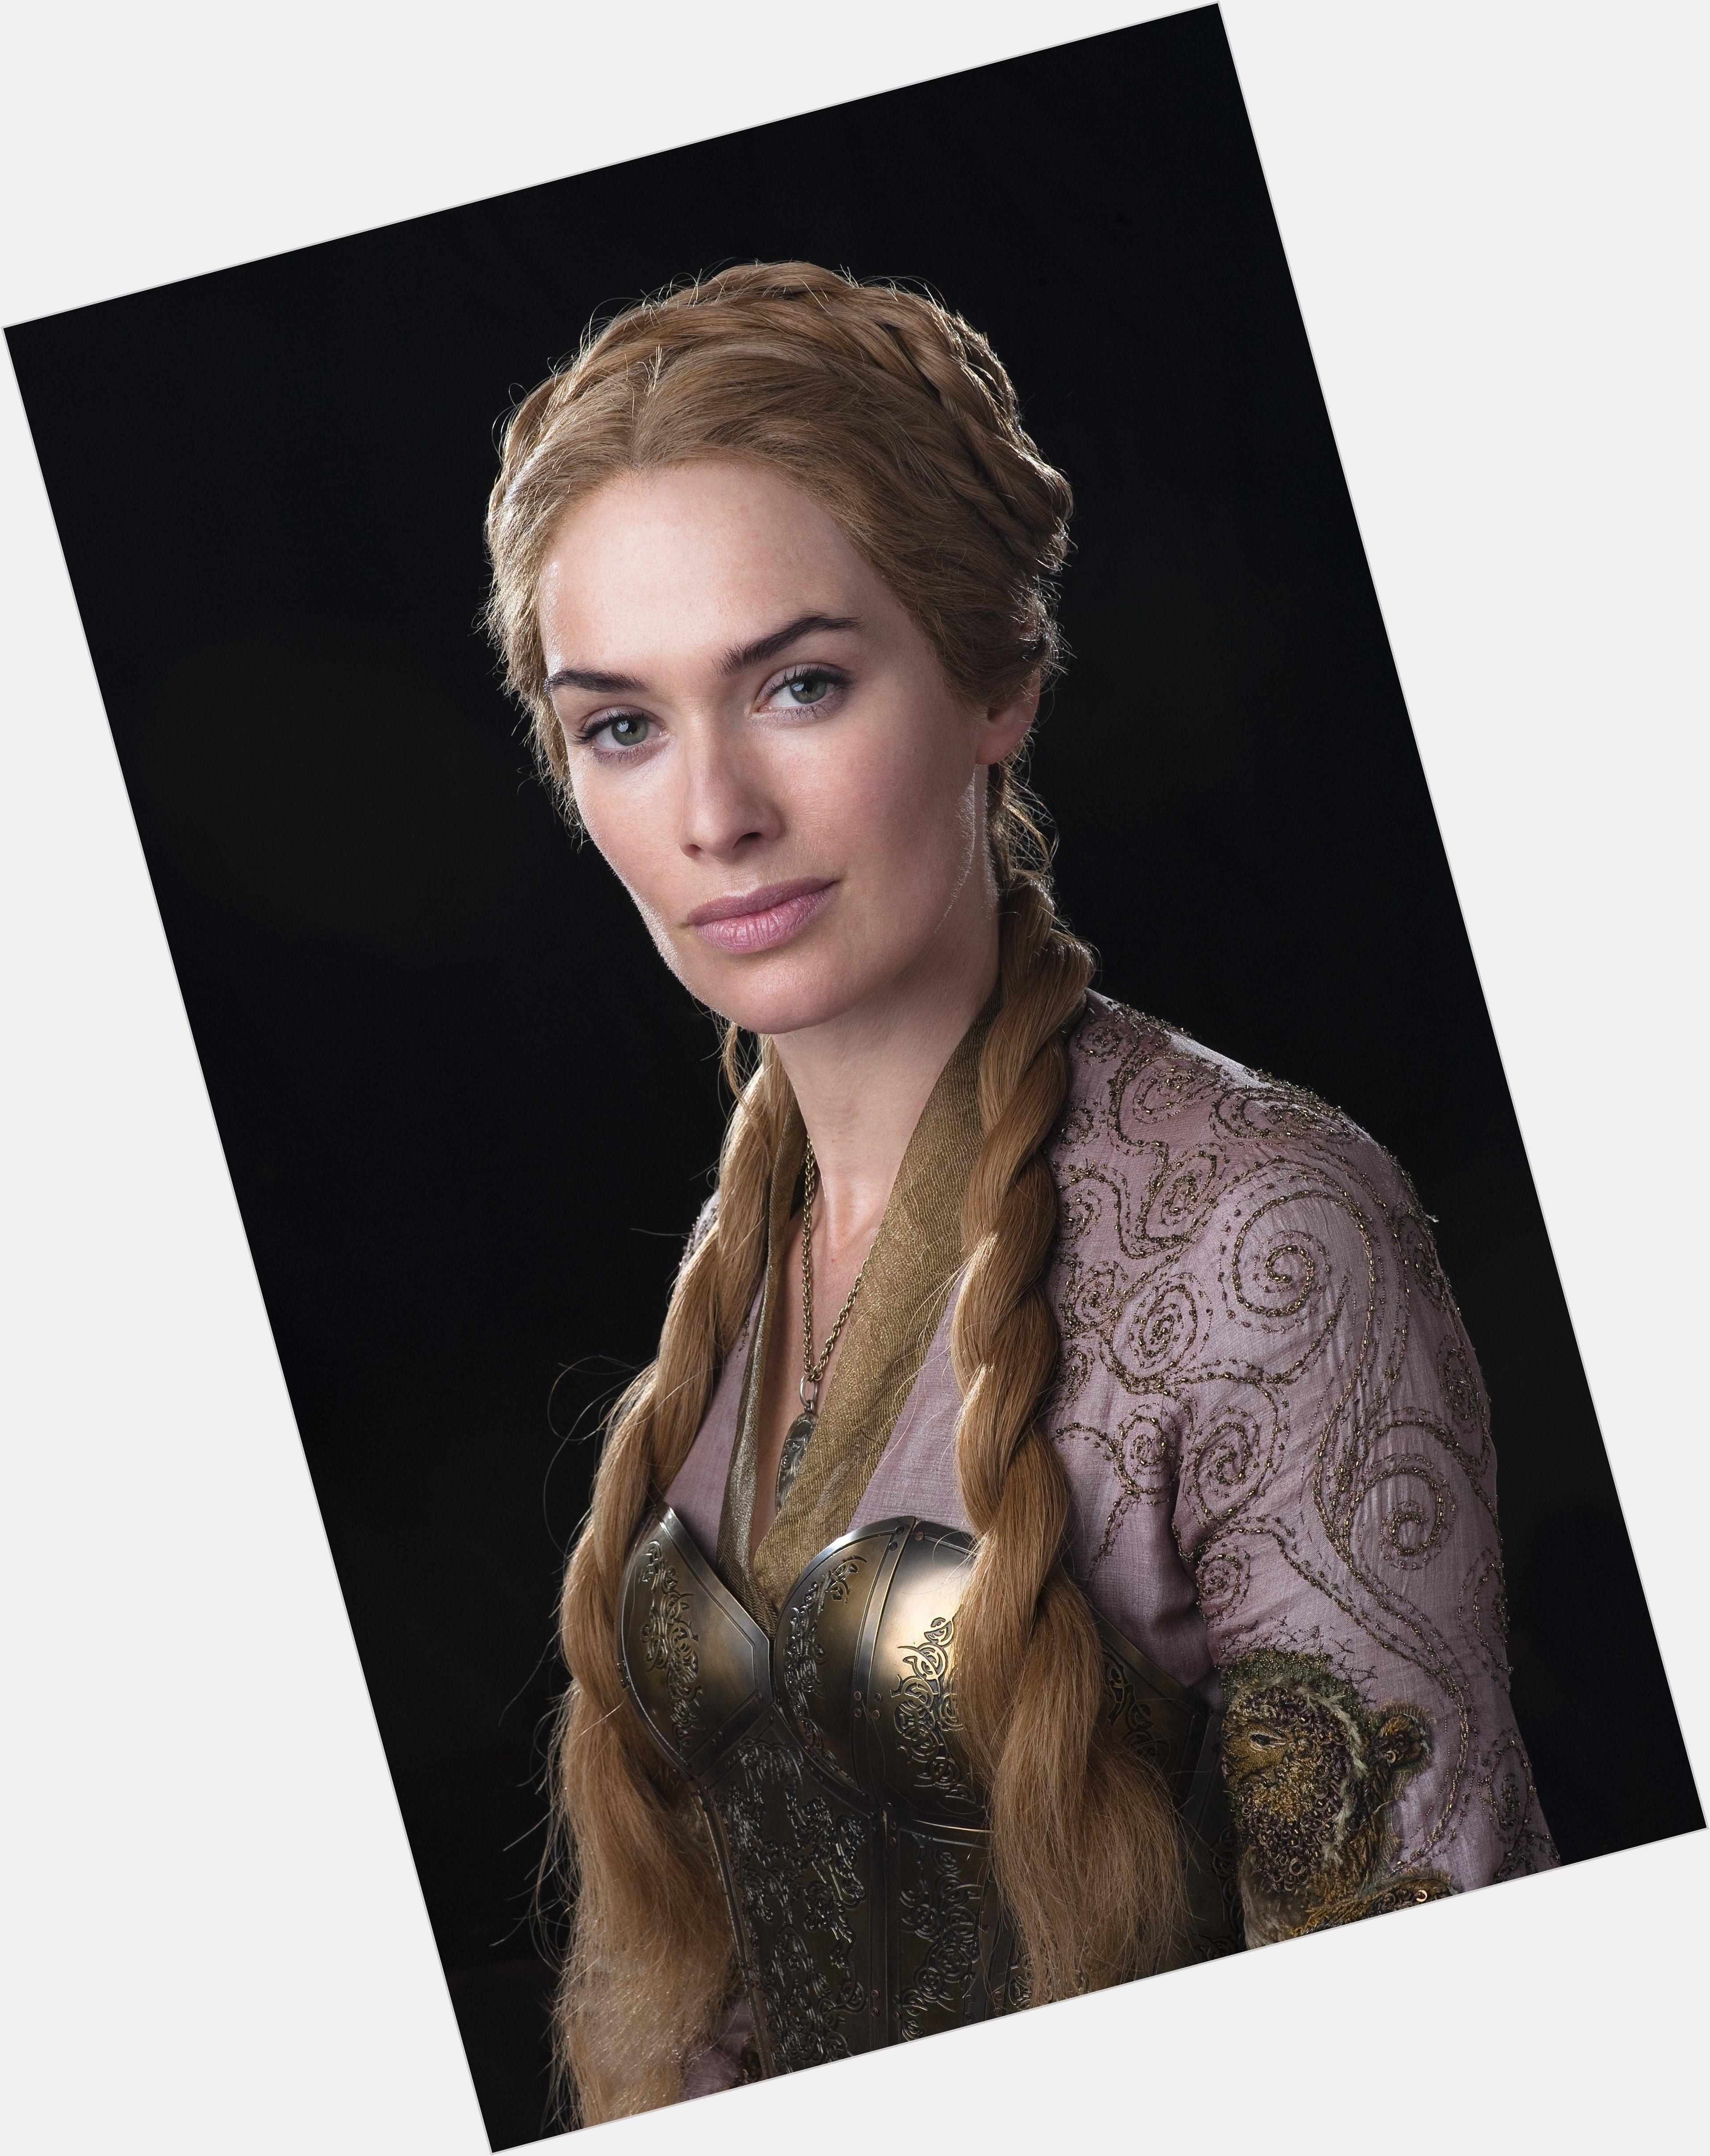 <a href="/hot-women/cersei-lannister/where-dating-news-photos">Cersei Lannister</a> Slim body,  blonde hair & hairstyles